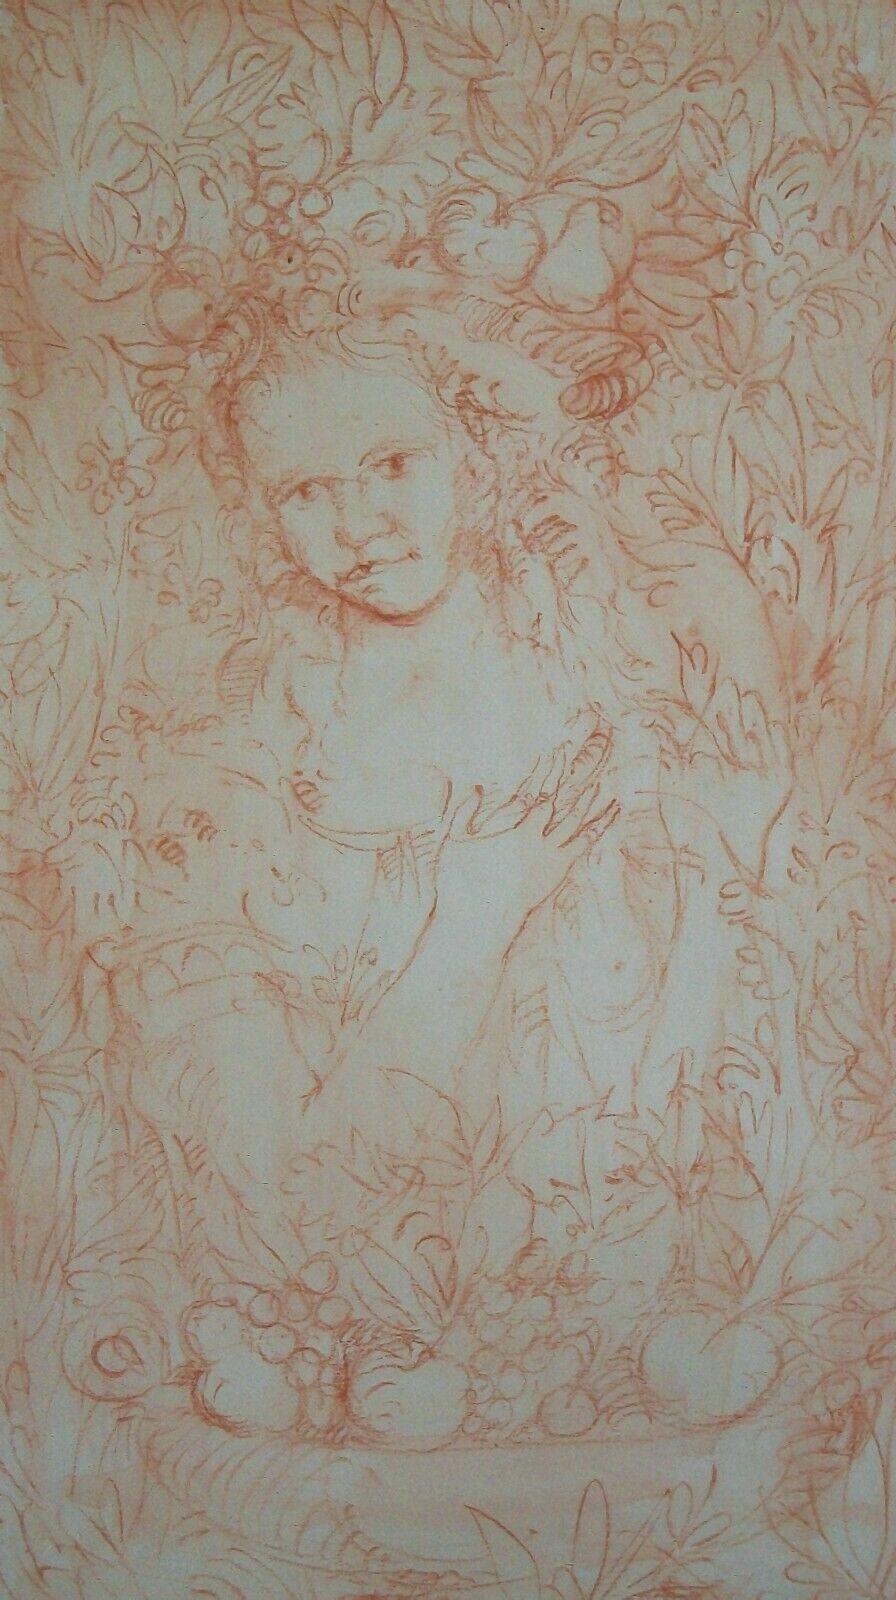 Renaissance style sanguine drawing with watercolor wash on paper - featuring a half length portrait of a young woman in a peasant type blouse with flora and leaves surrounding her - a bowl brimming with fruit in the foreground - thin light graphite